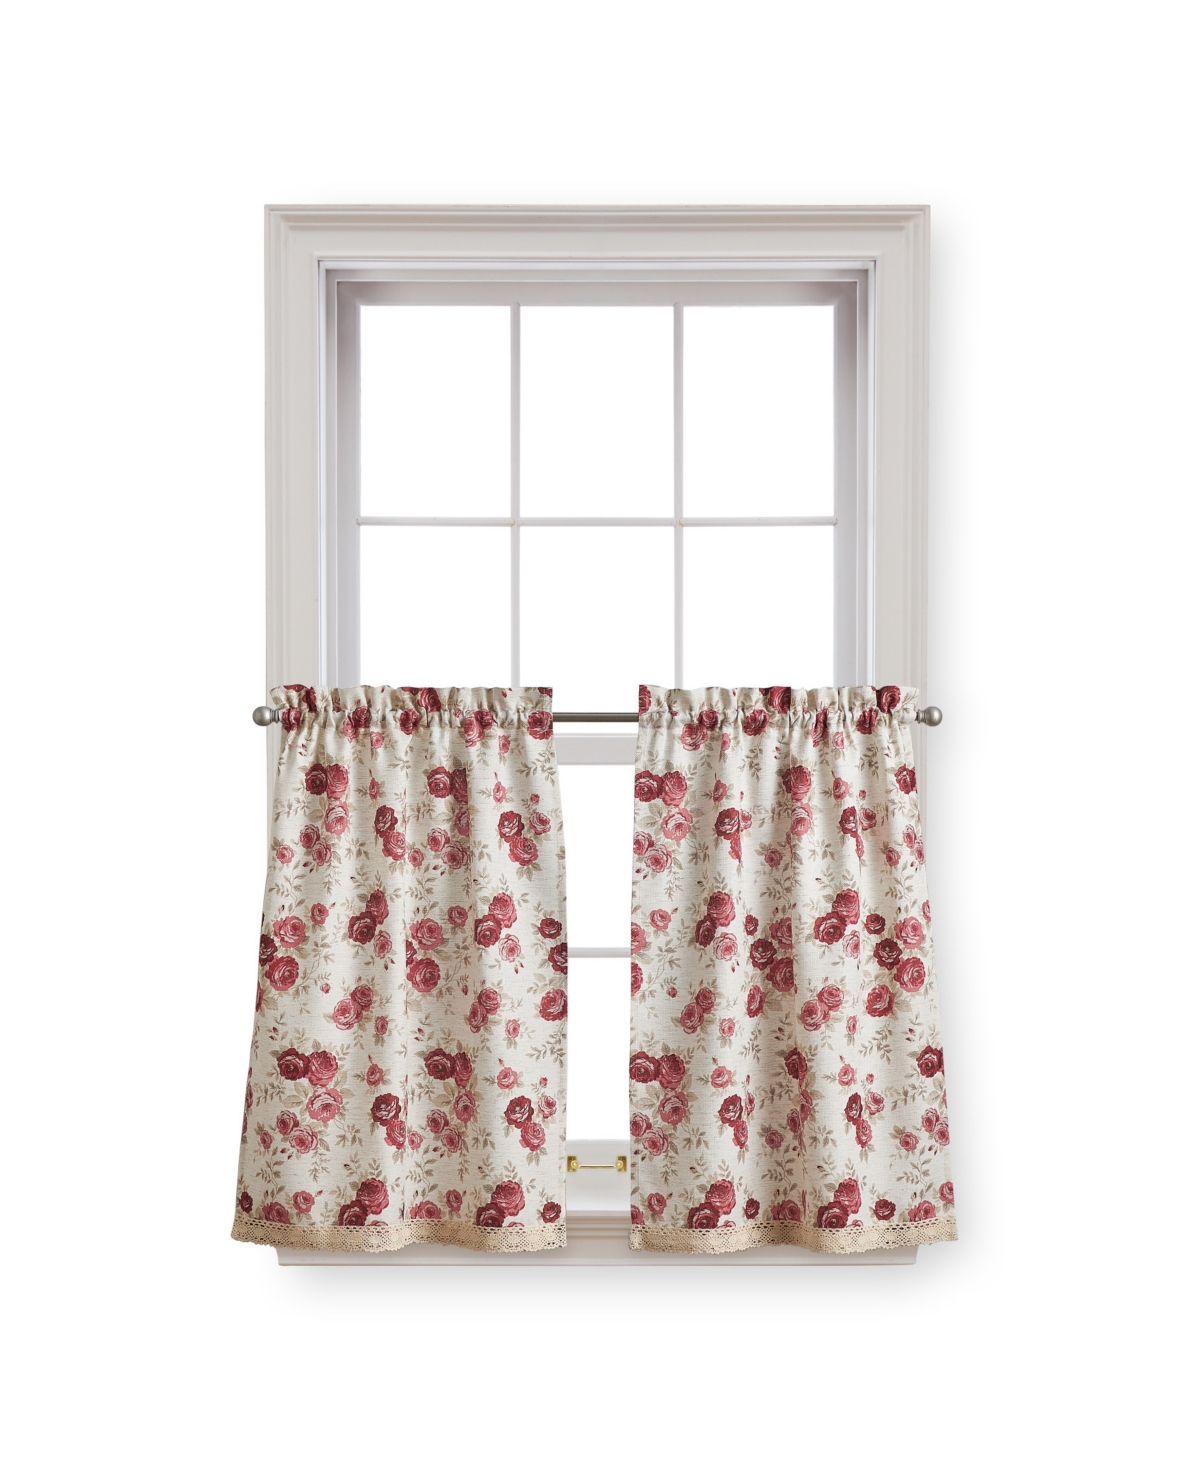 Rose 36" x 54" Tailored Tier, Set of 2 - Red